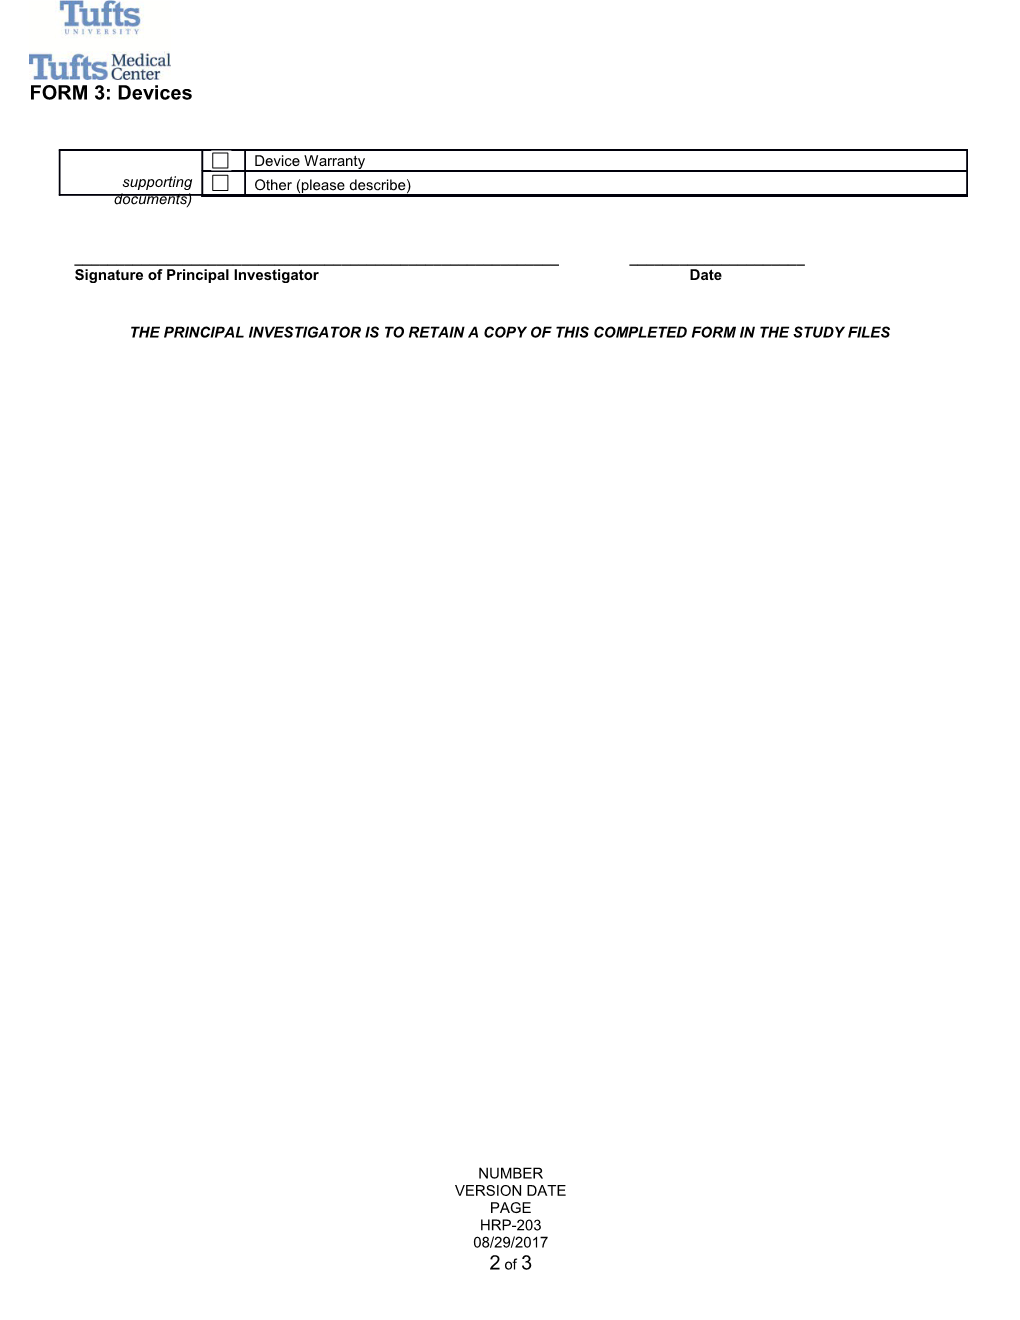 The Principal Investigator Is to Retain a Copy of This Completed Form in the Study Files